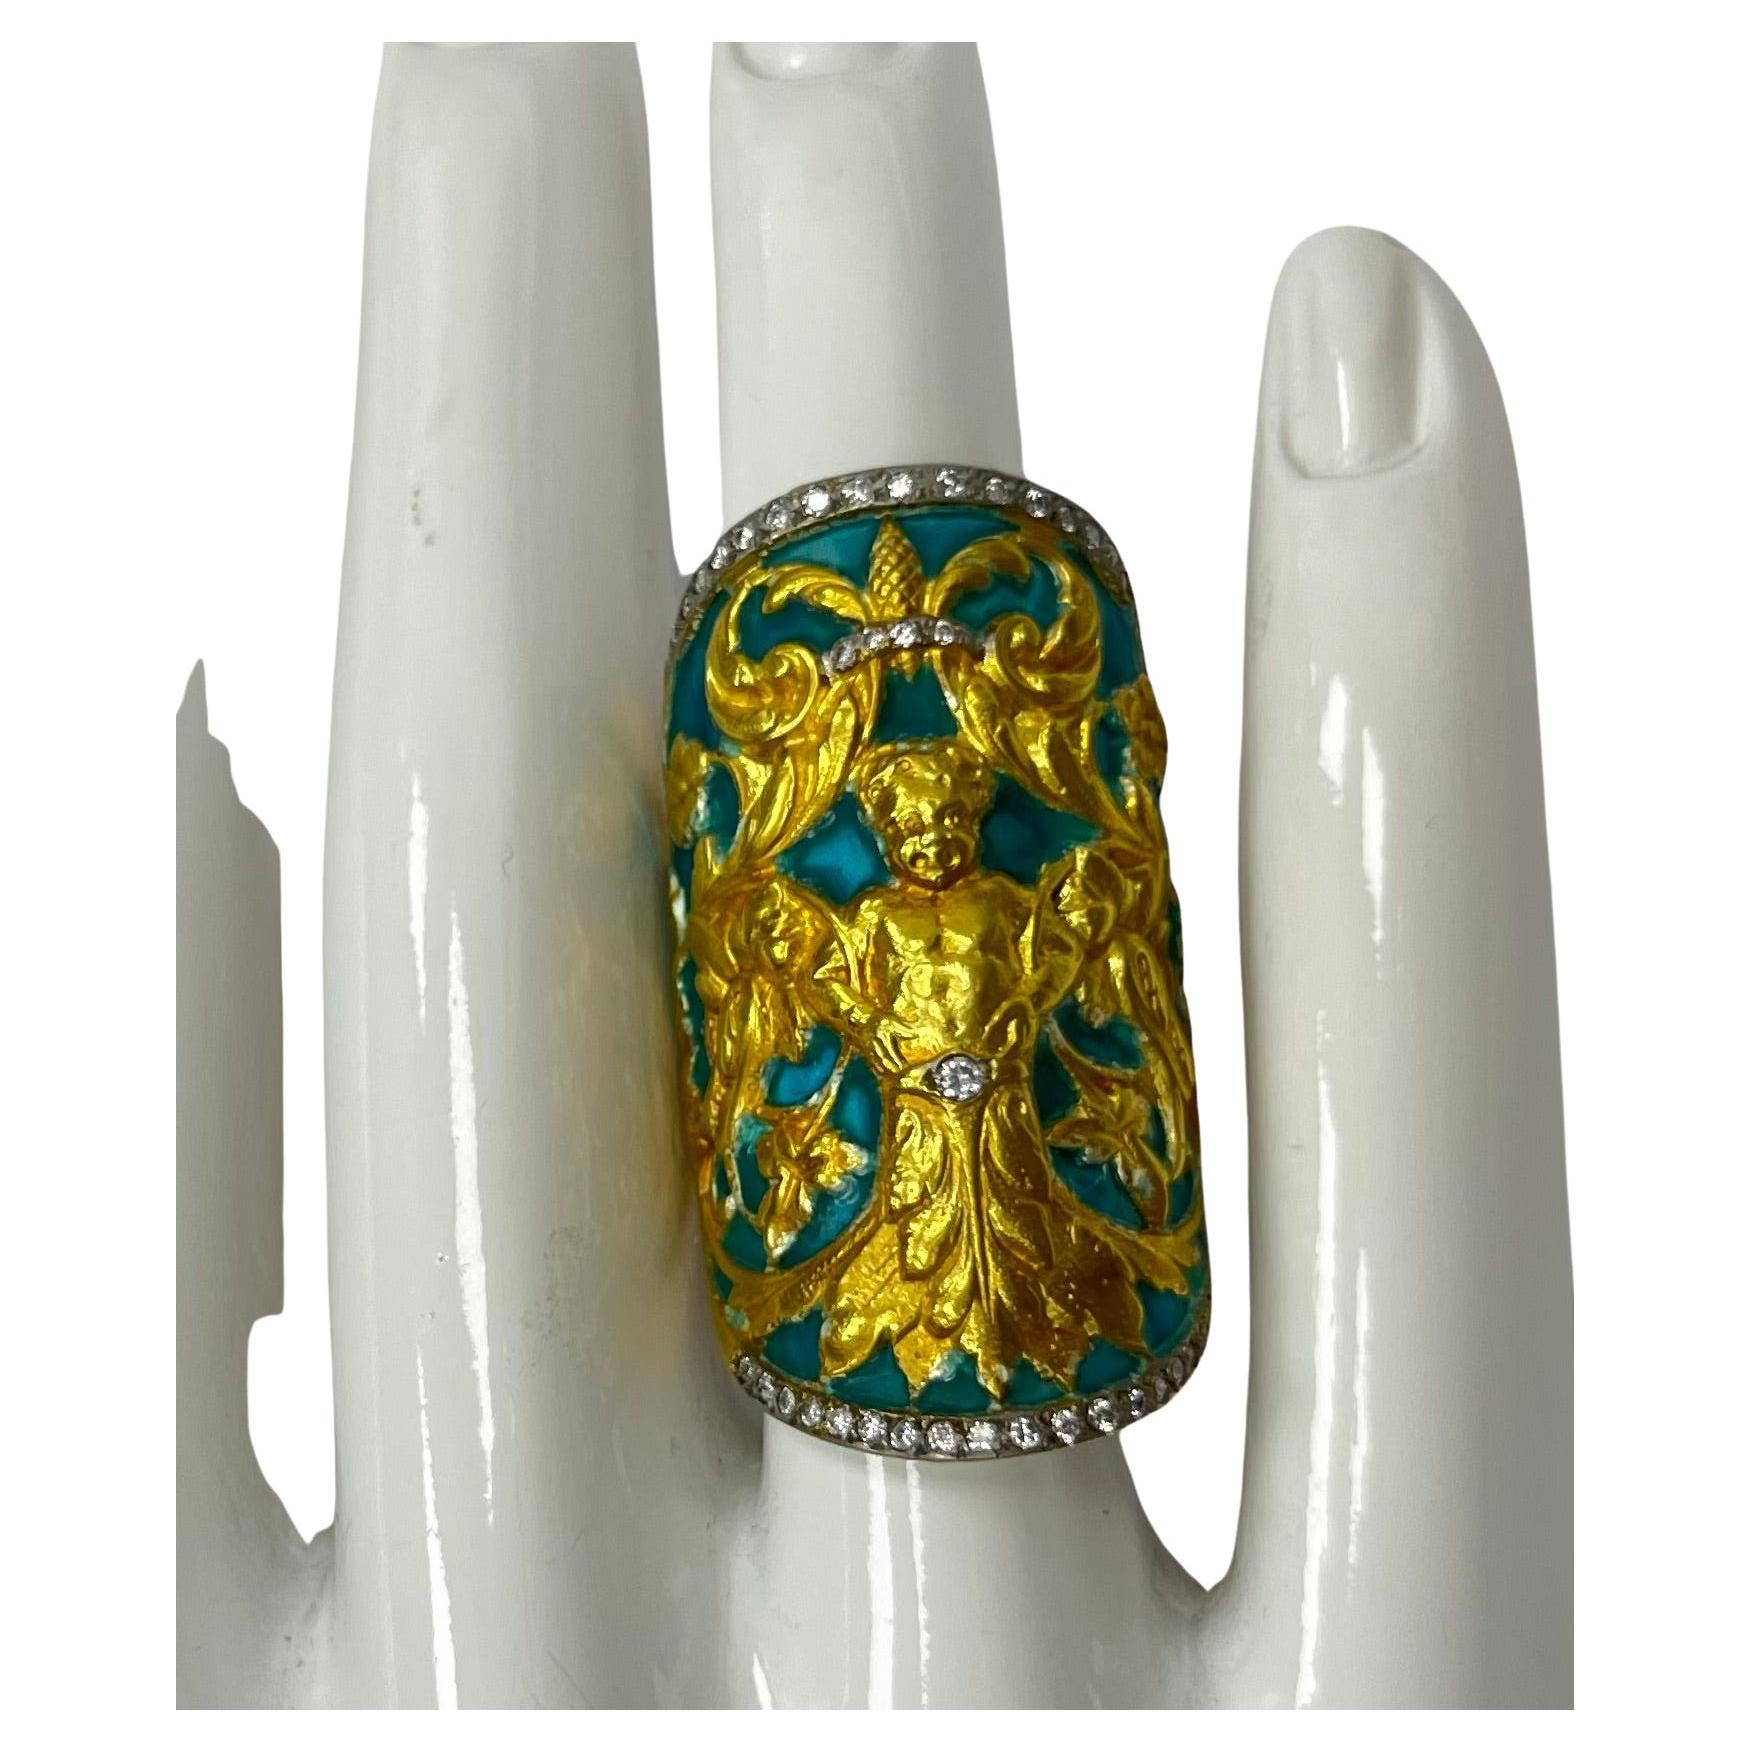 Vintage Yellow Gold Diamond Plique-A-Jour Enamel Ring
with 41 ddiamonds
ring size approx 7.5